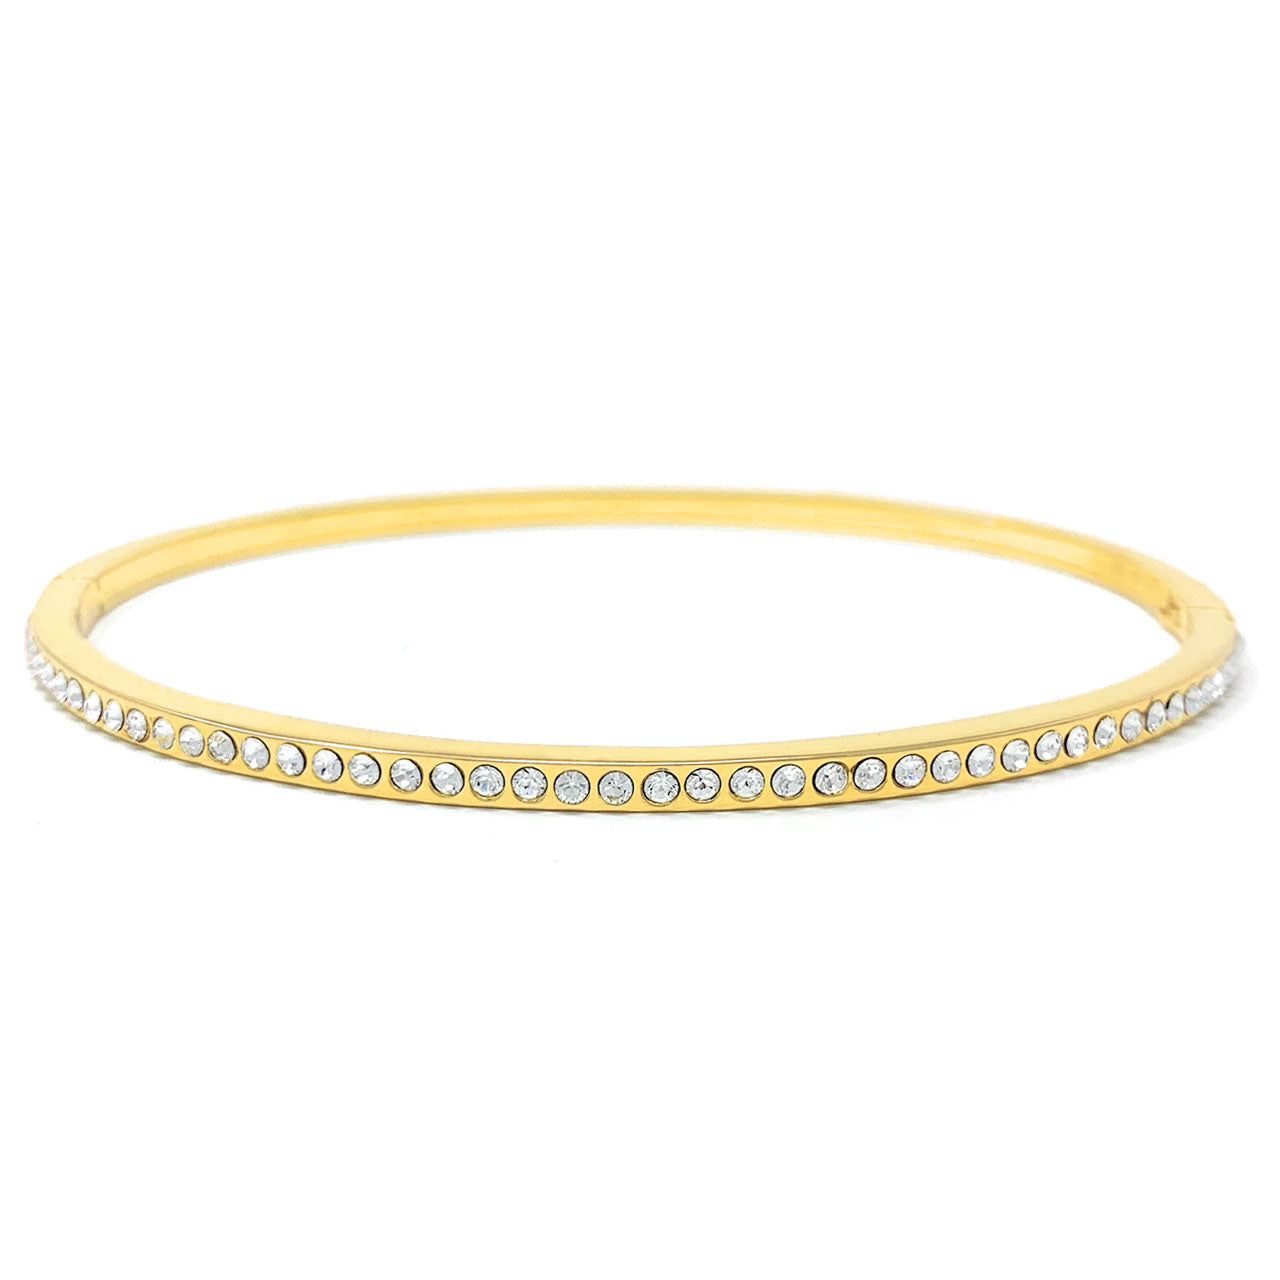 Amelia Pave Bangle Bracelet with White Clear Round Crystals from Swarovski Gold Plated - Ed Heart